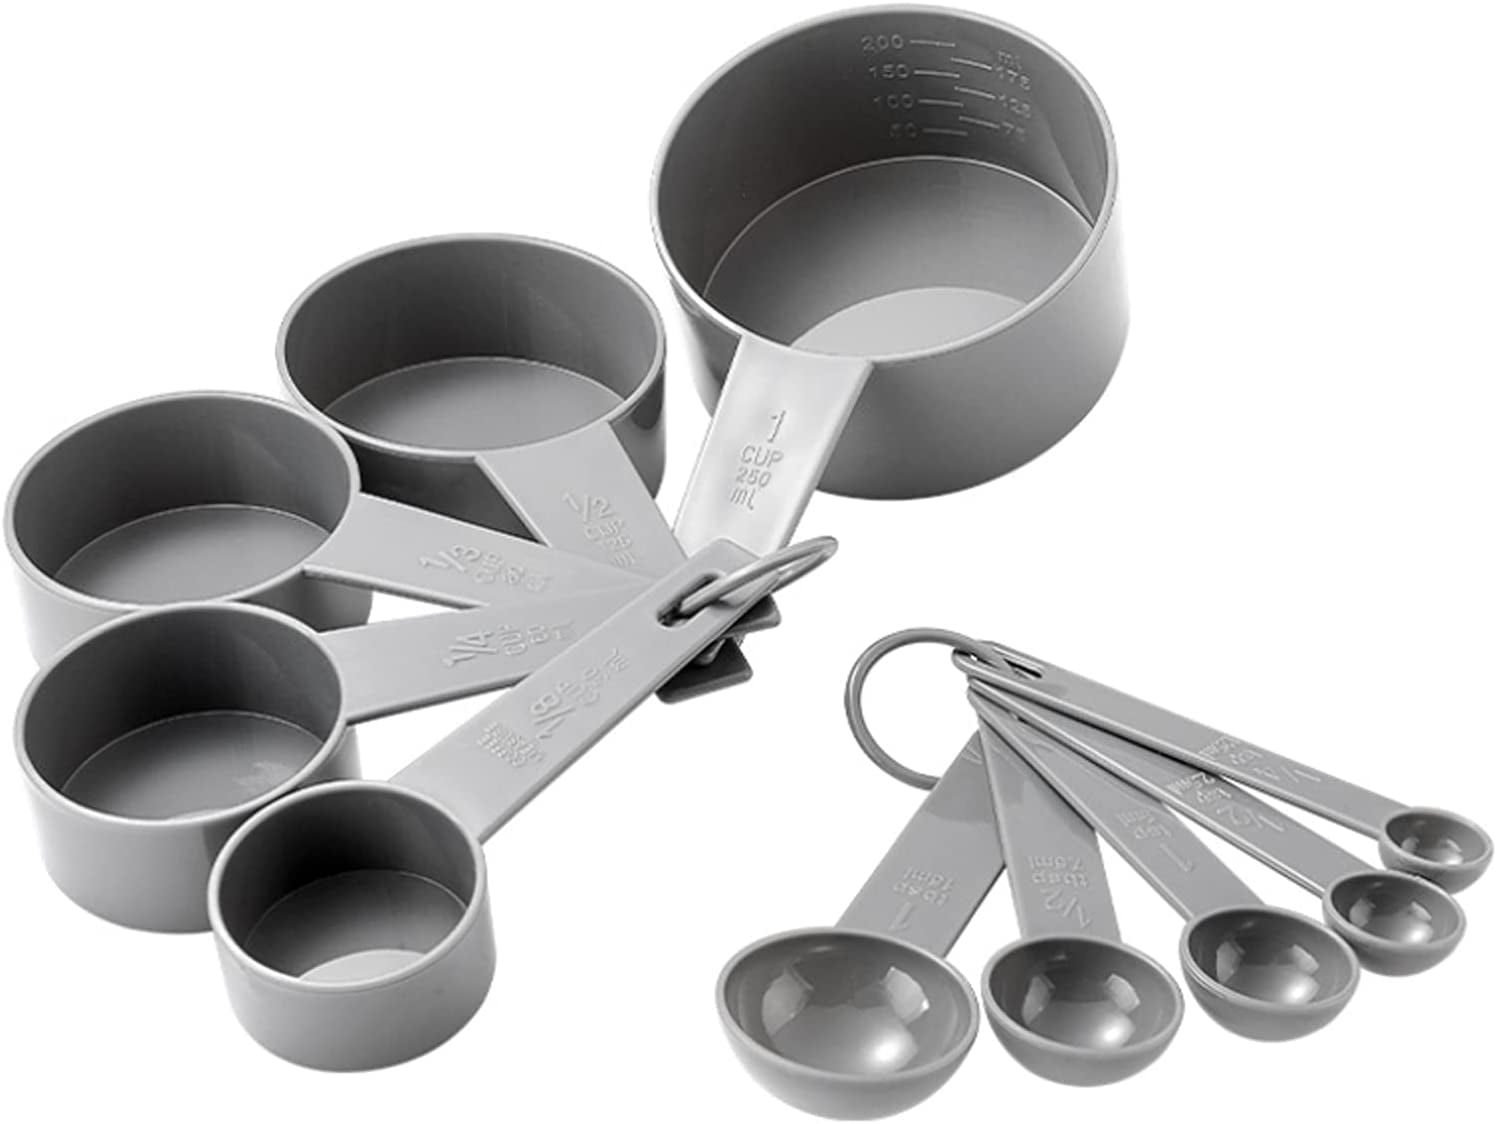 10 Pieces Measuring Cups and Spoons Set – Baking Treasures Bake Shop